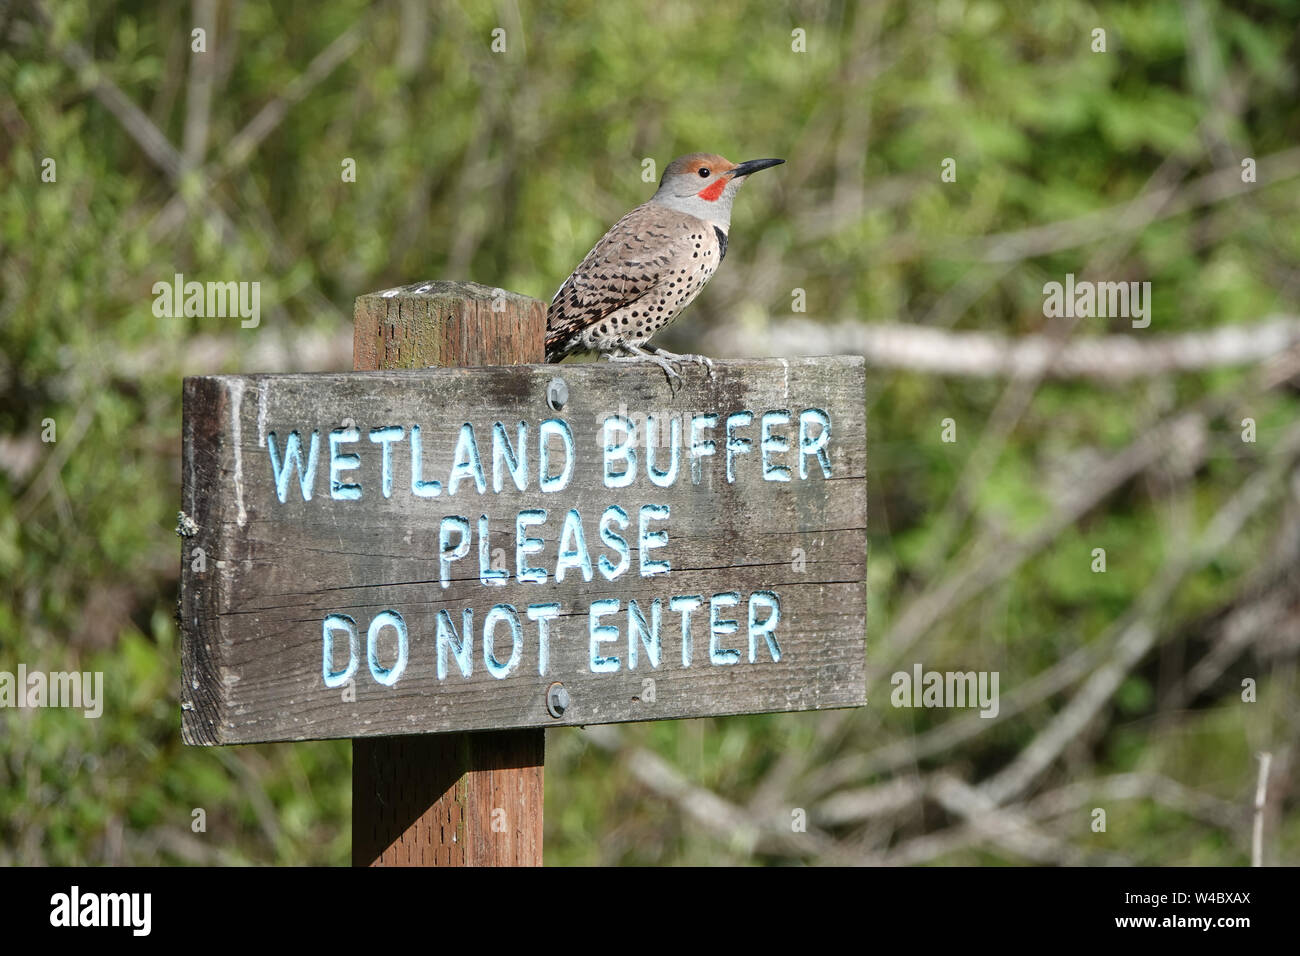 Male northern flicker or common flicker (Colaptes auratus) sitting on 'Wetland bbuffer, please do not enter' sign Stock Photo